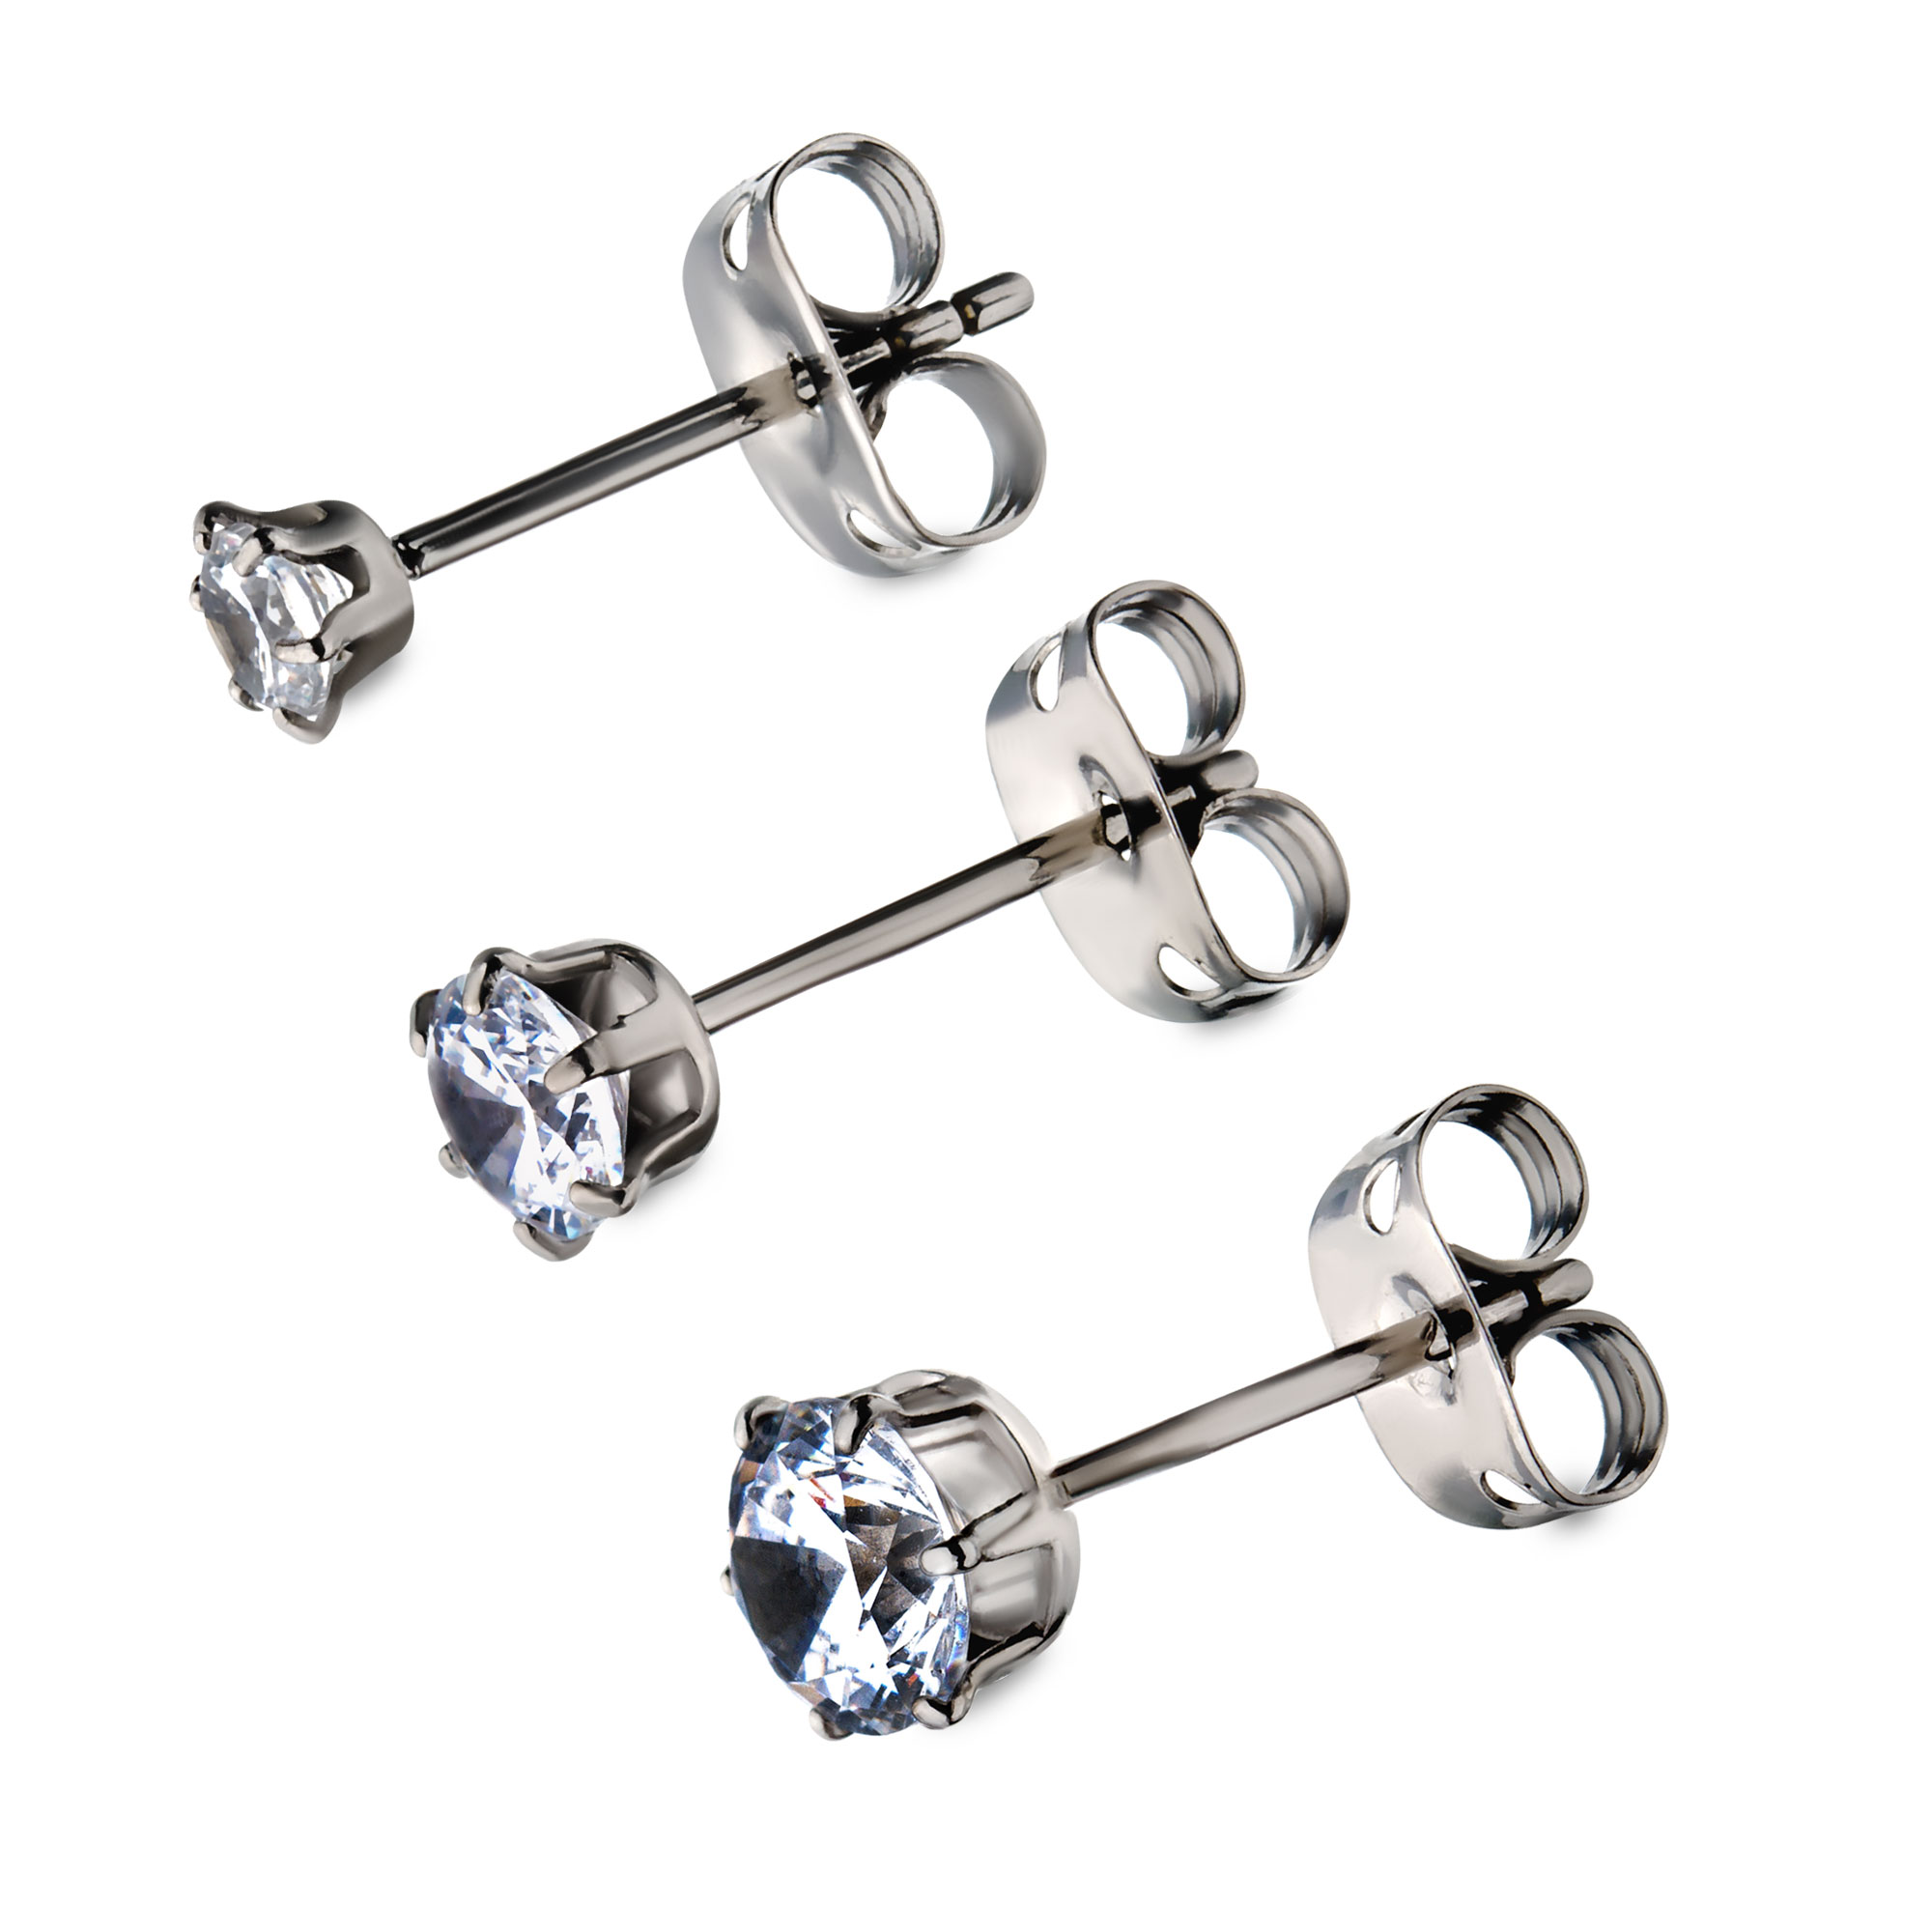 20g Titanium Post and Butterfly Back with Prong Set CZ Stud Earrings Image 2 Ken Walker Jewelers Gig Harbor, WA